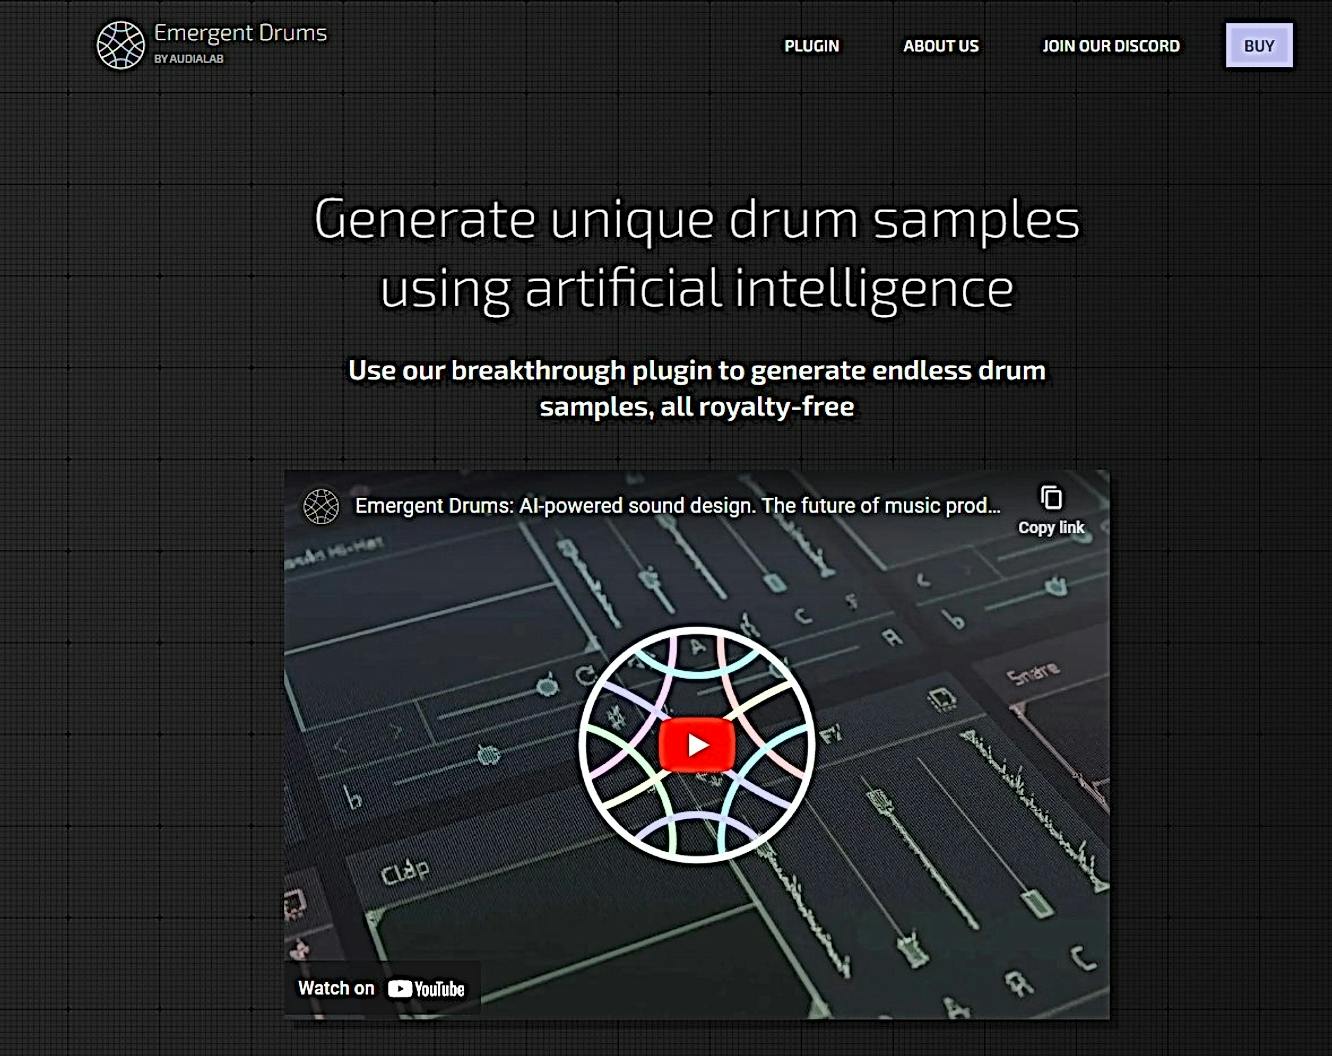 Emergent Drums featured